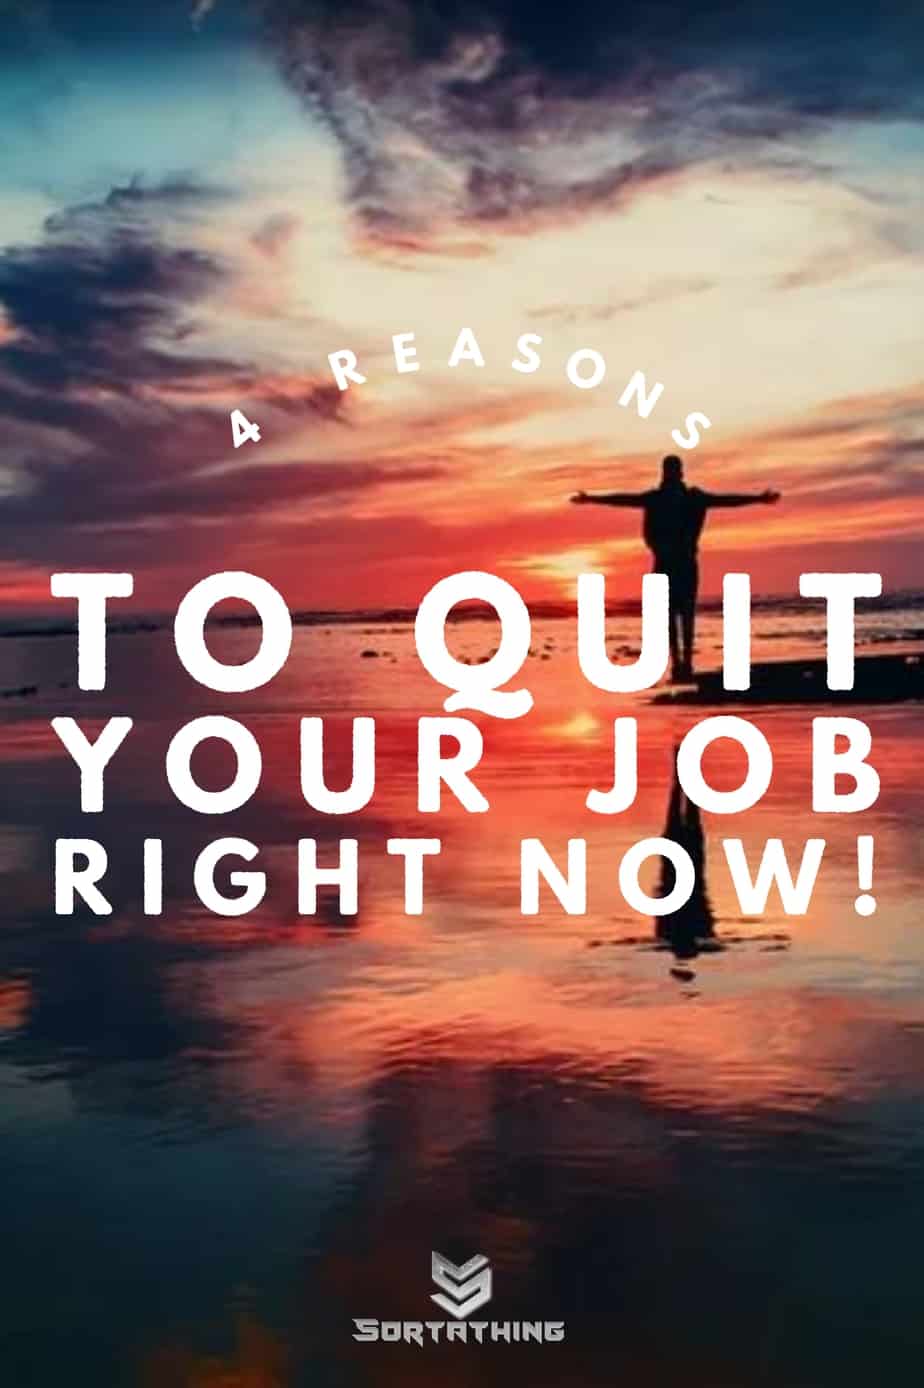 4 Reason to quit your job right now